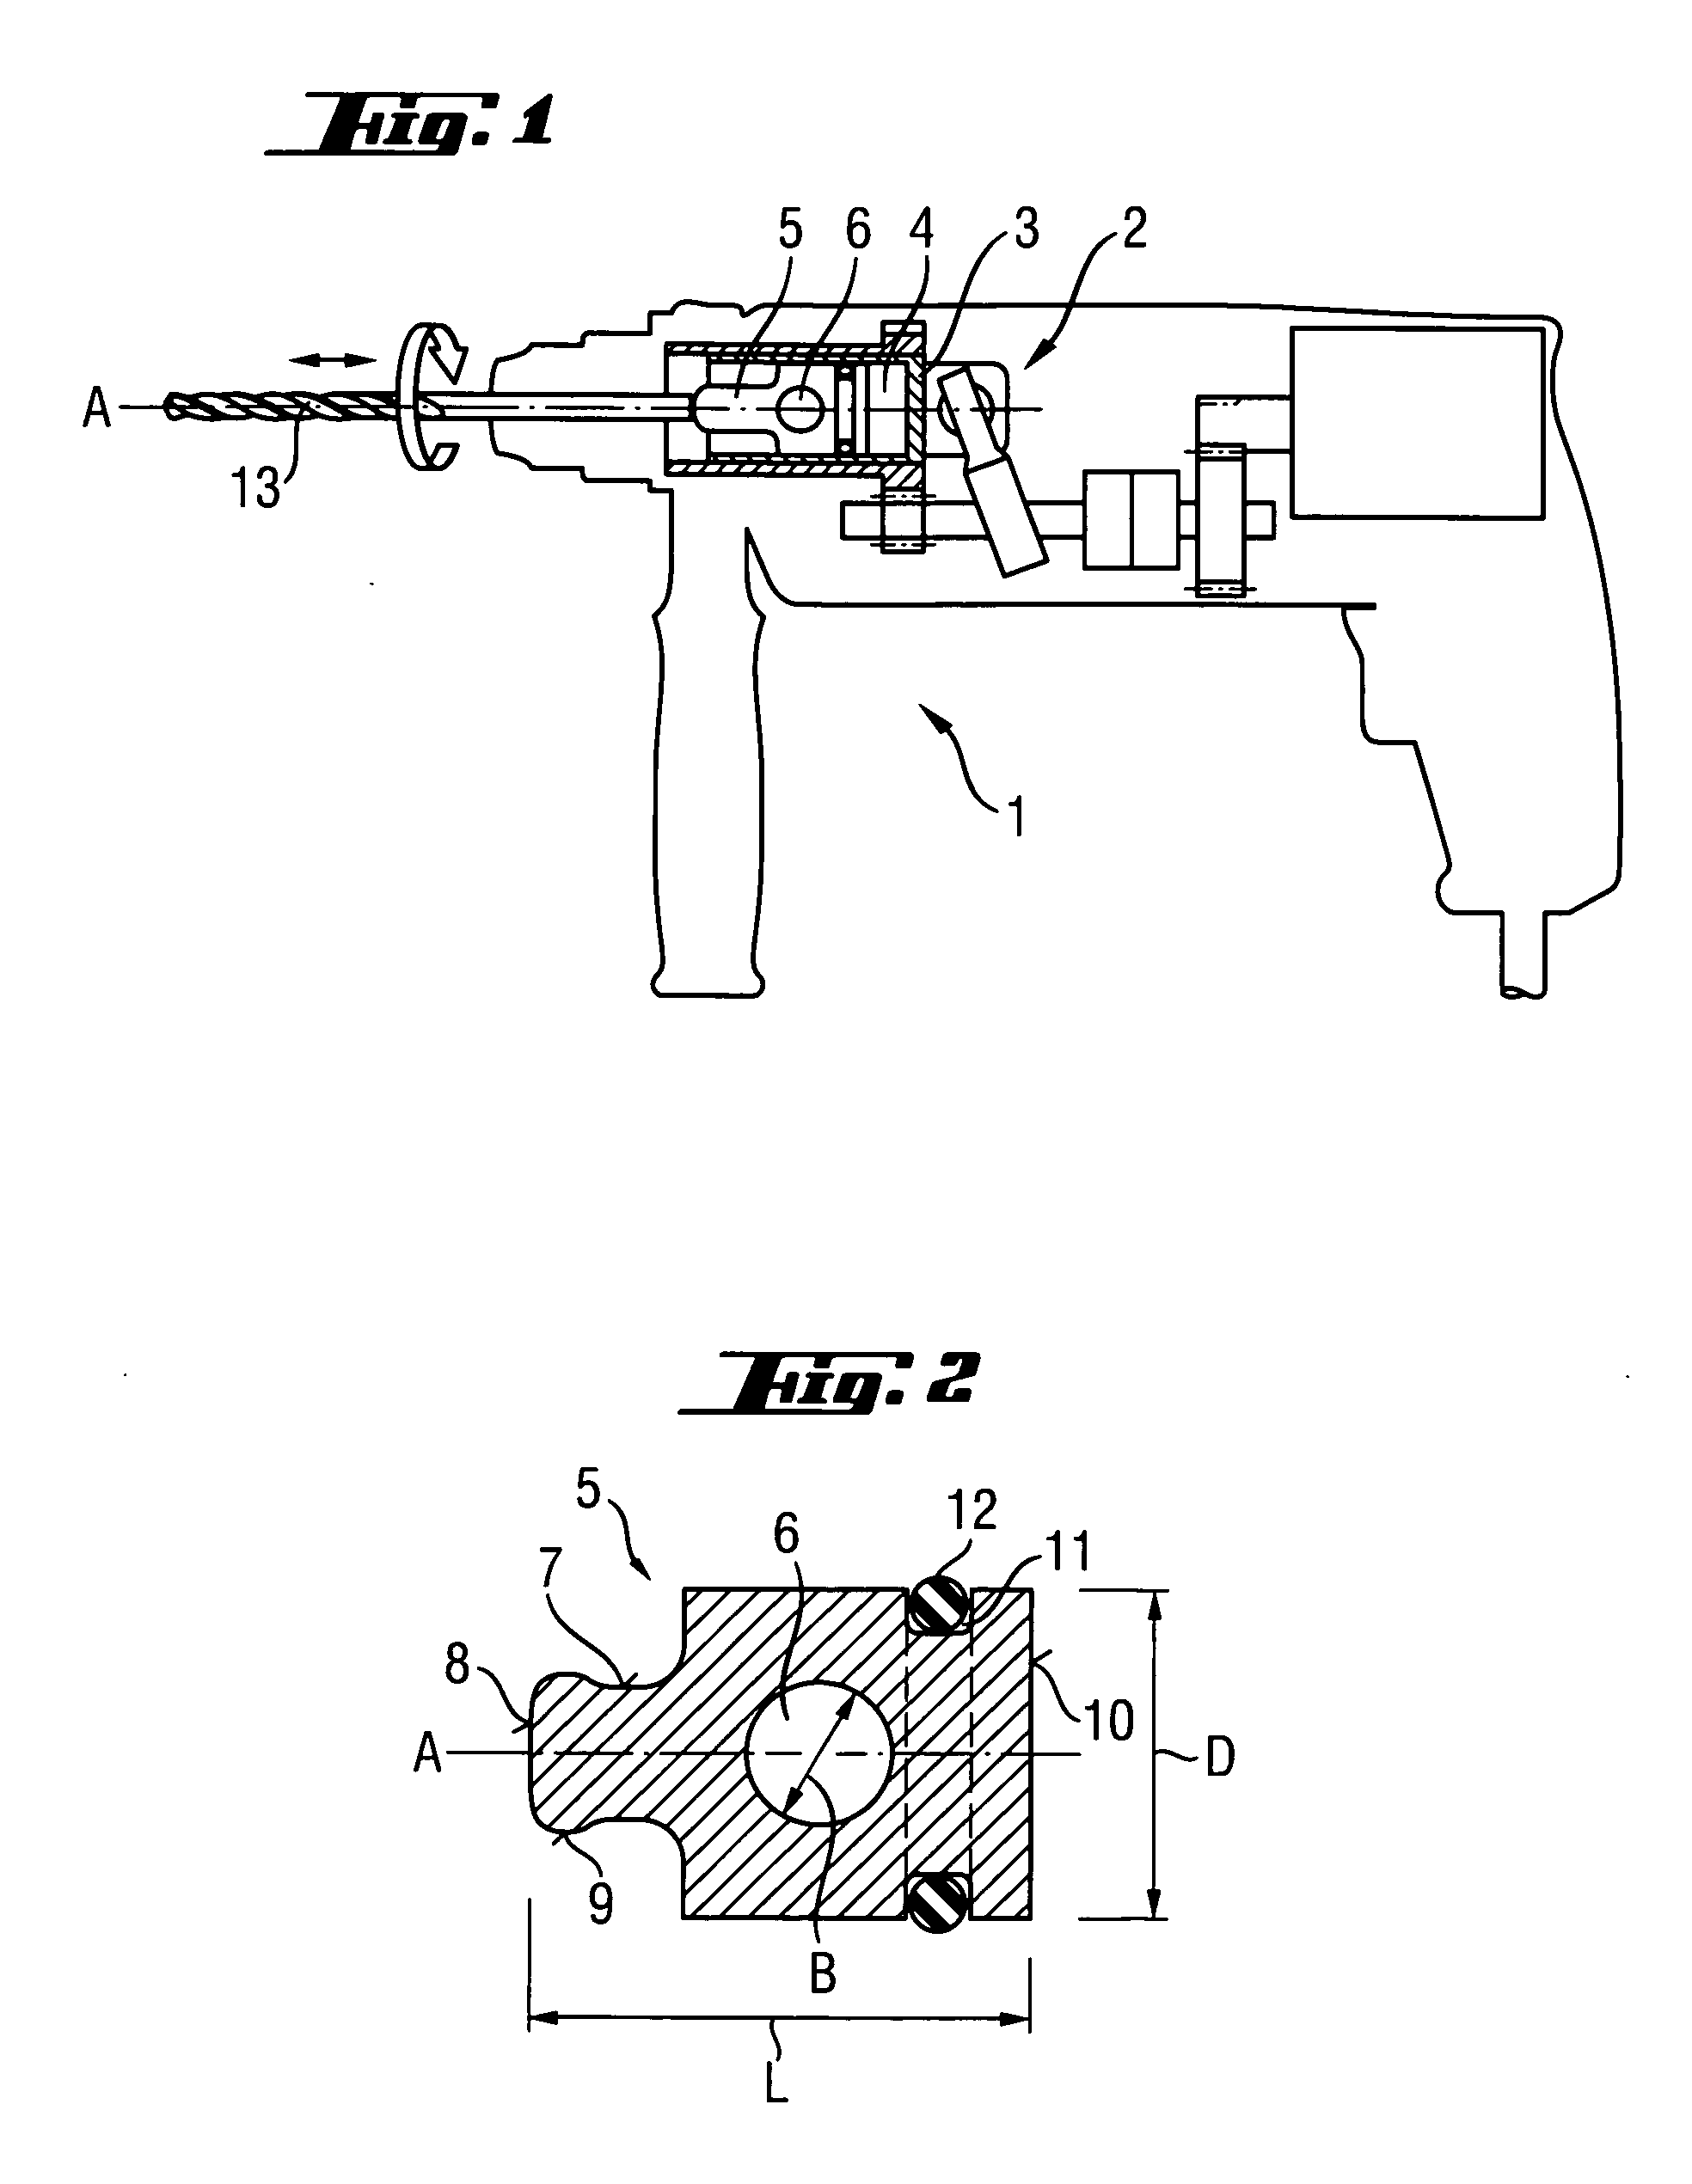 Hand-held power tool with a pneumatic percussion mechanism